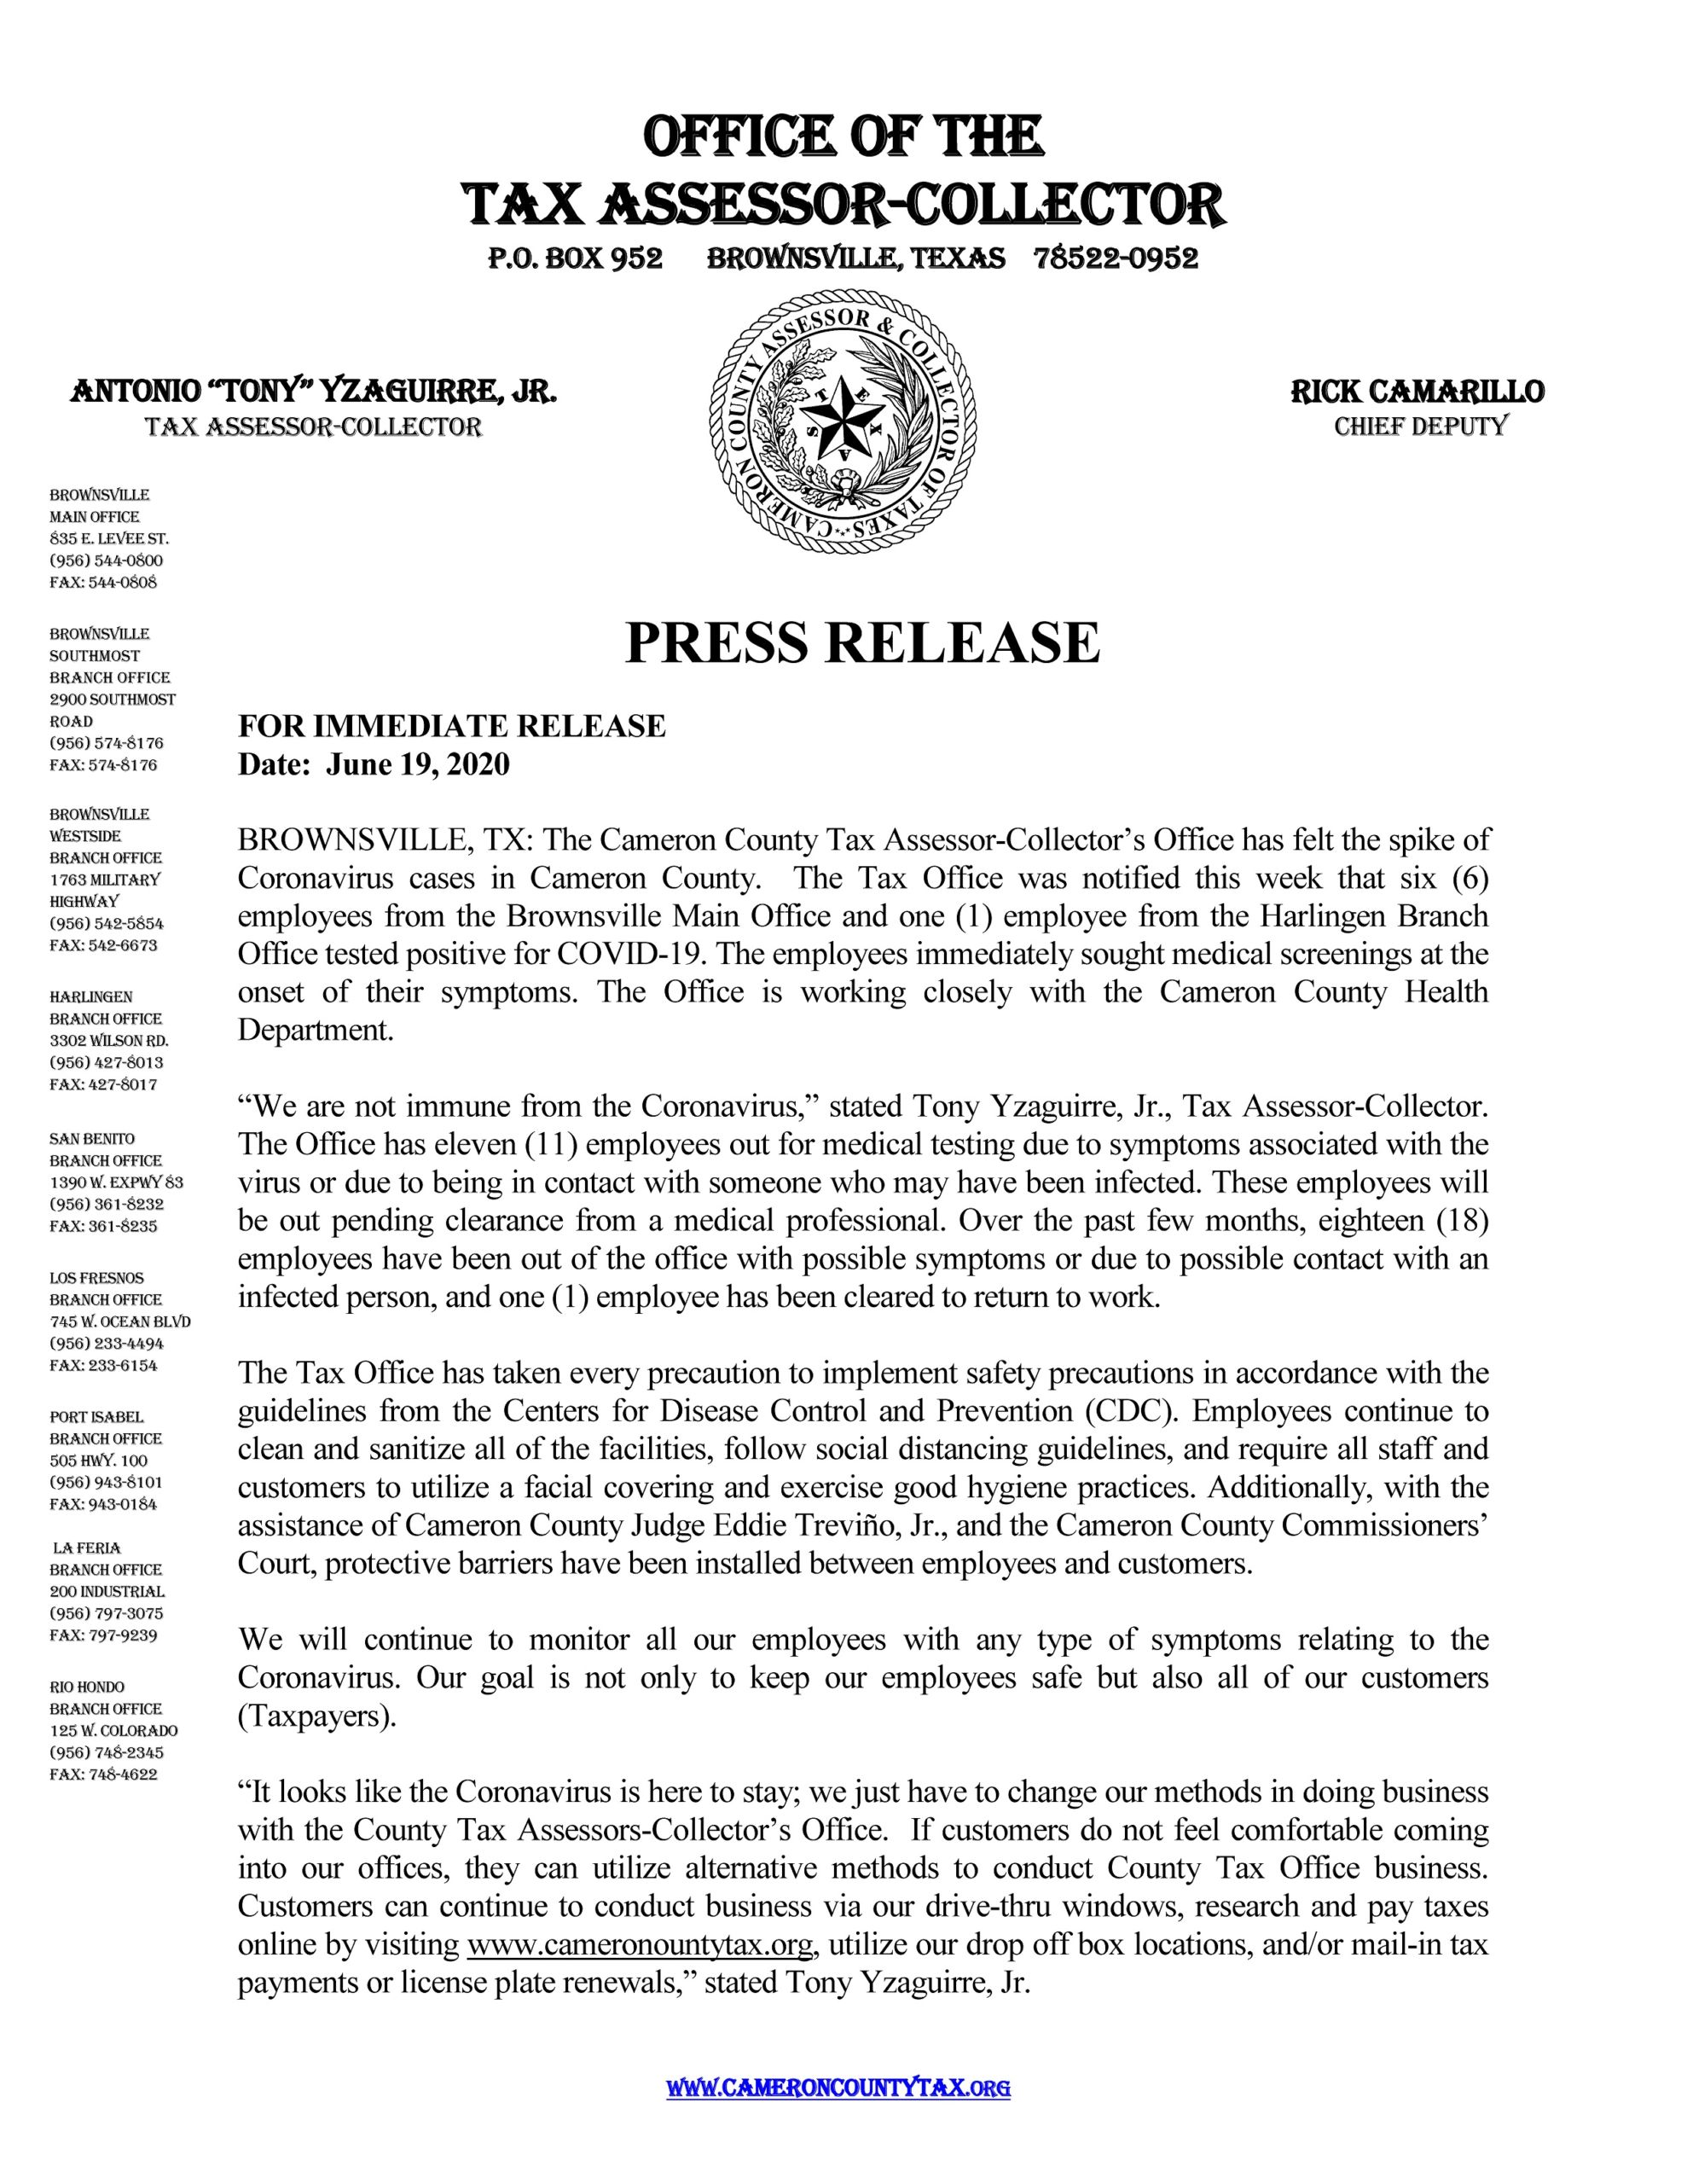 Tax Assessor Collector's Office COVID-19 Press Release - Cameron County